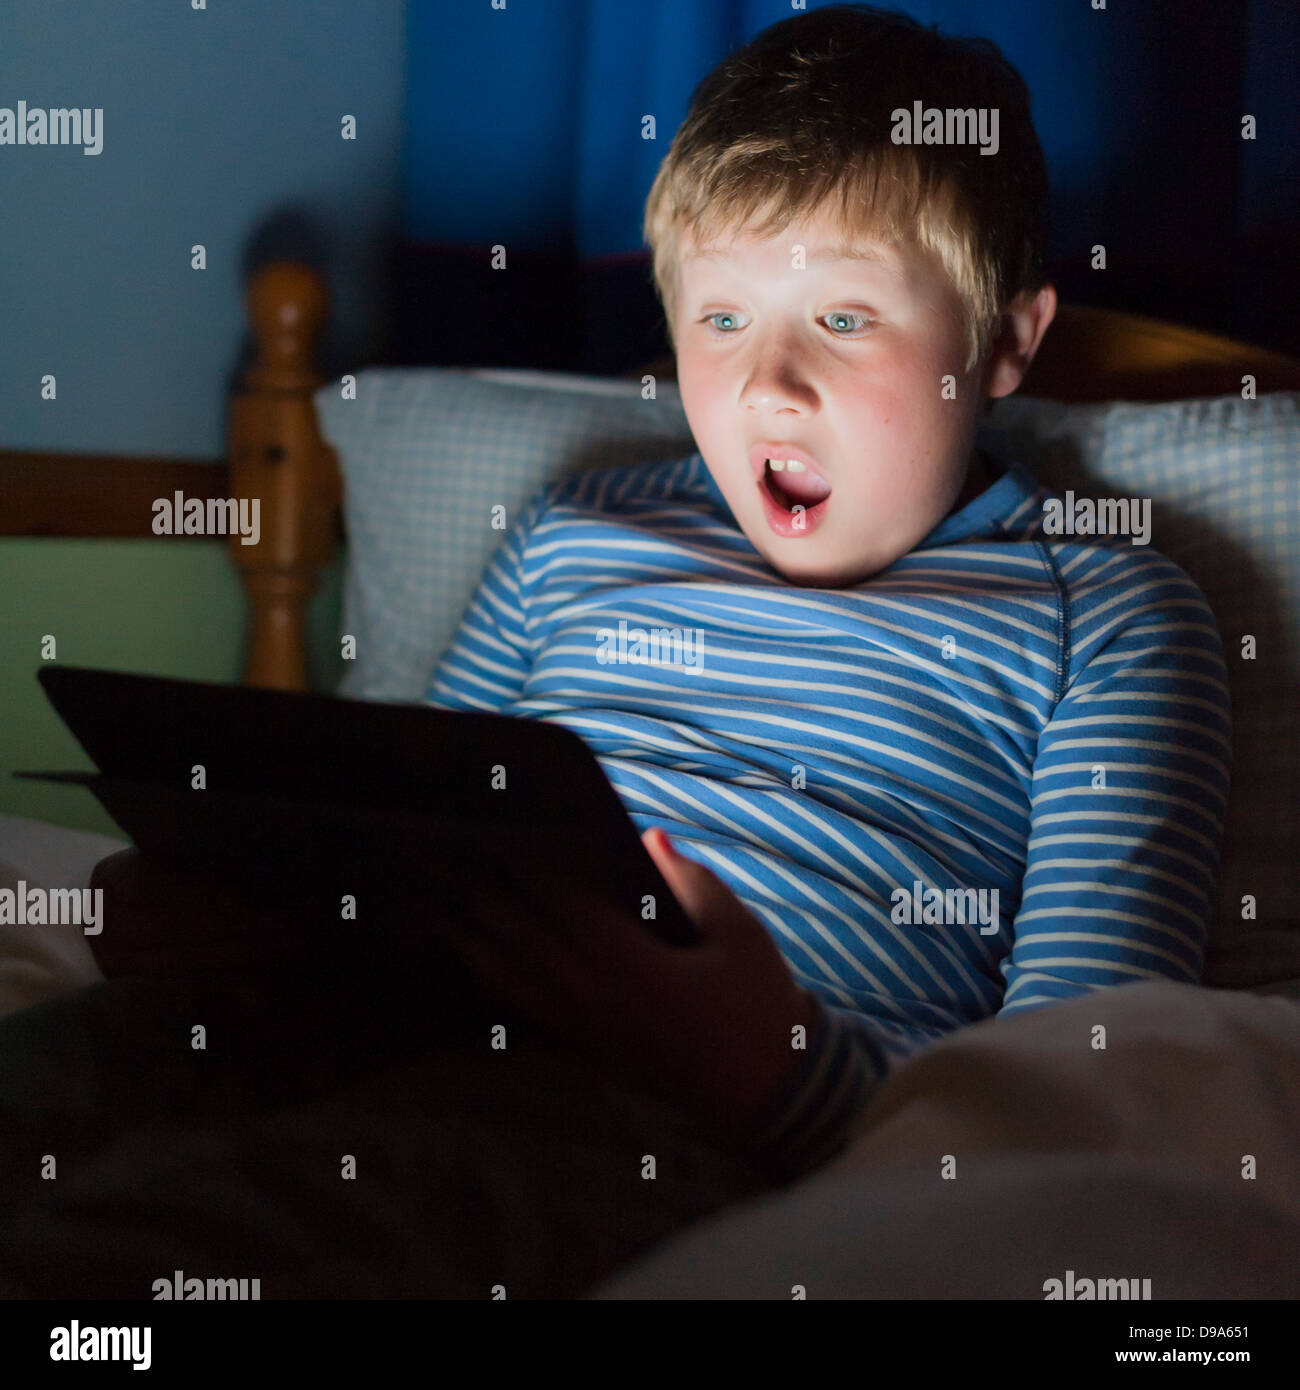 A 9 year old boy using a tablet on the internet in bed Stock Photo